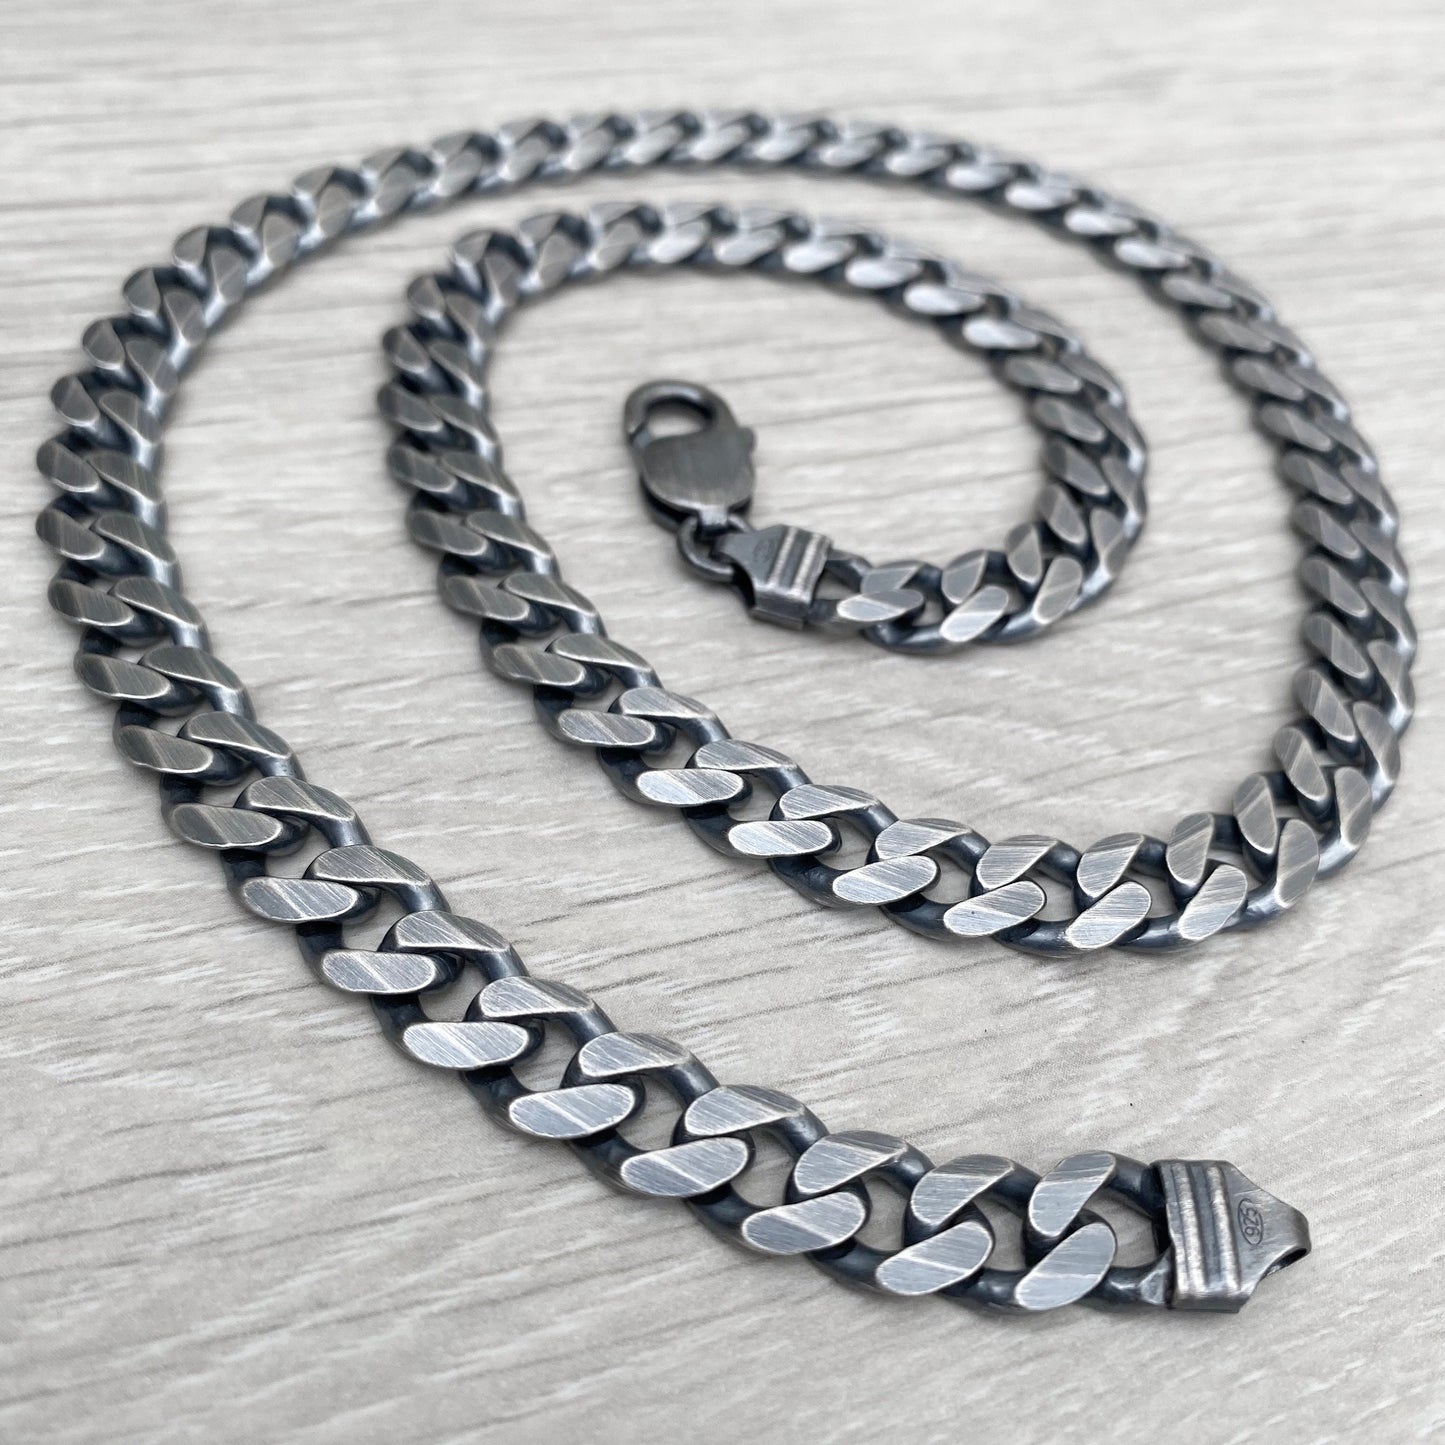 Men's oxidised heavy silver curb chain - 80g - 9.2mm wide - 22 inch length